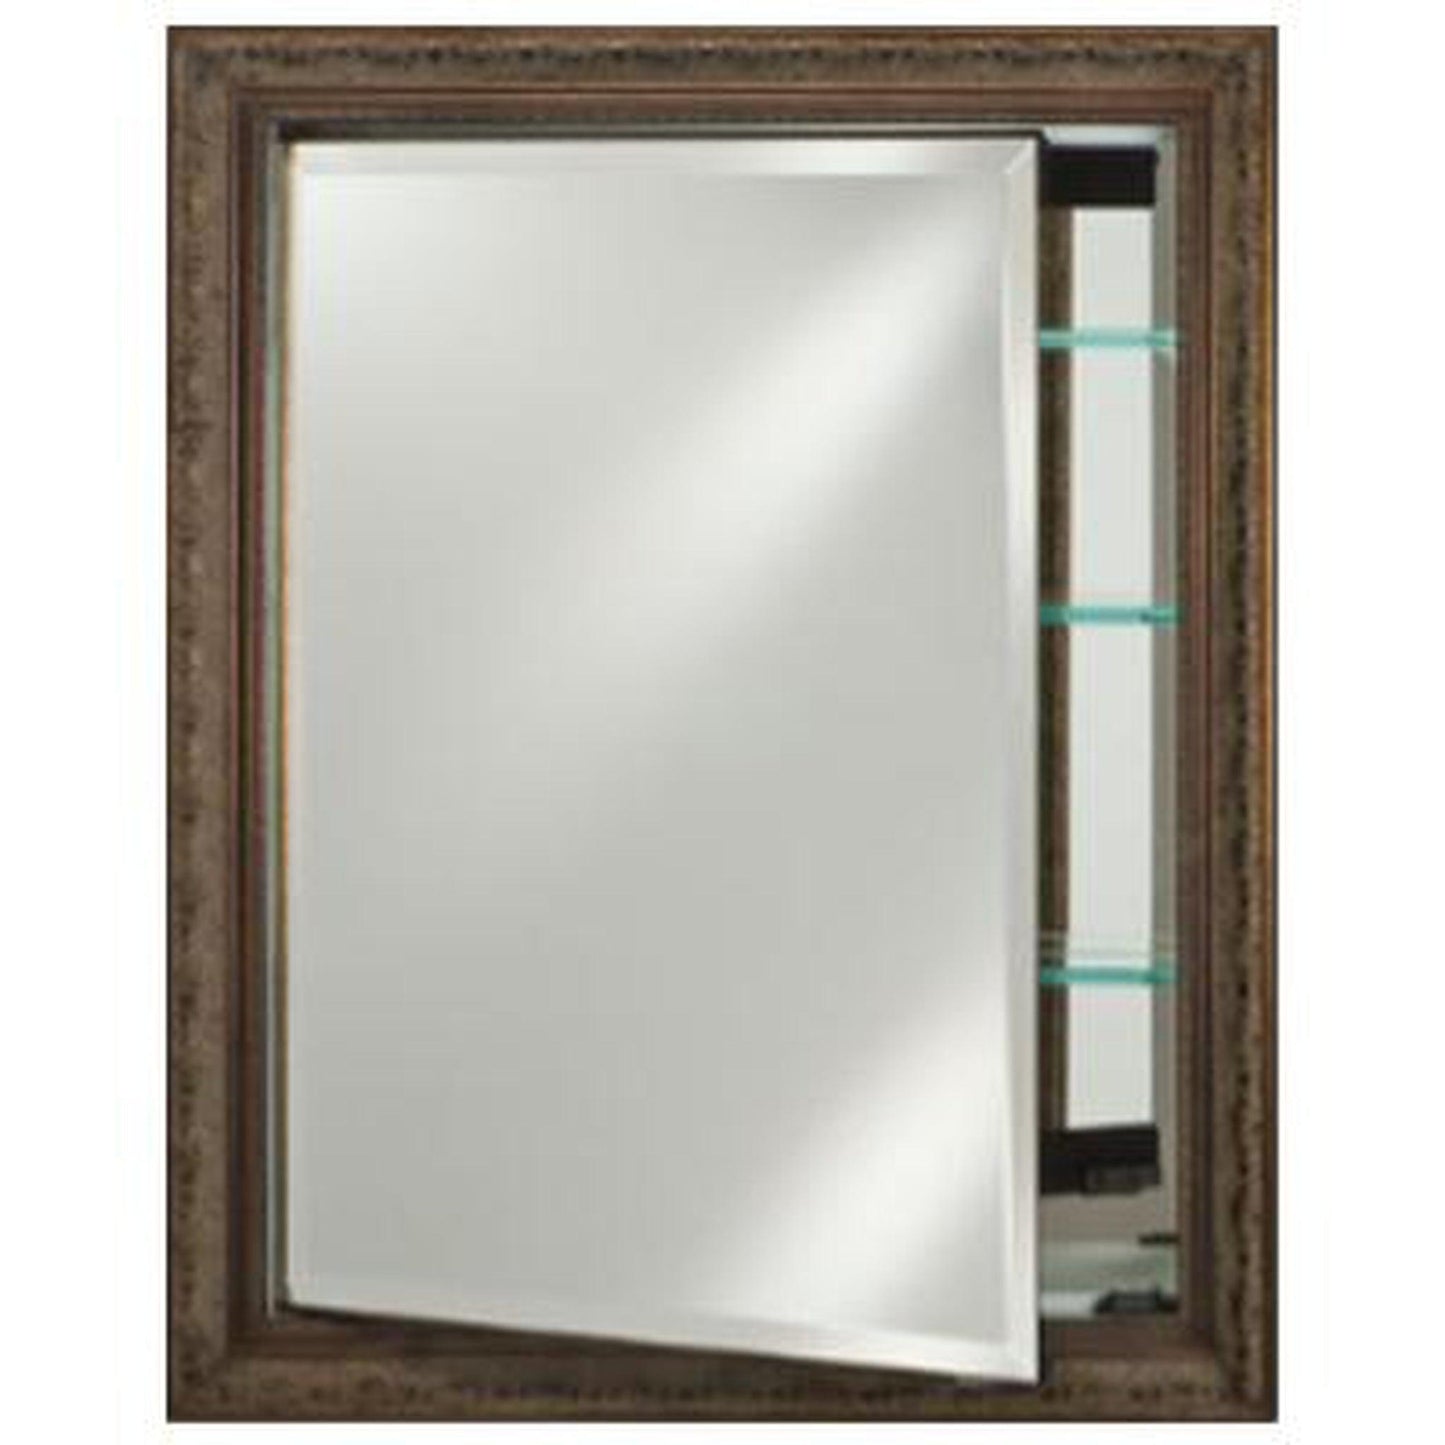 Afina Signature 17" x 30" Polished Glimmer-Flat Recessed Reversible Hinged Single Door Medicine Cabinet With Beveled Edge Mirror